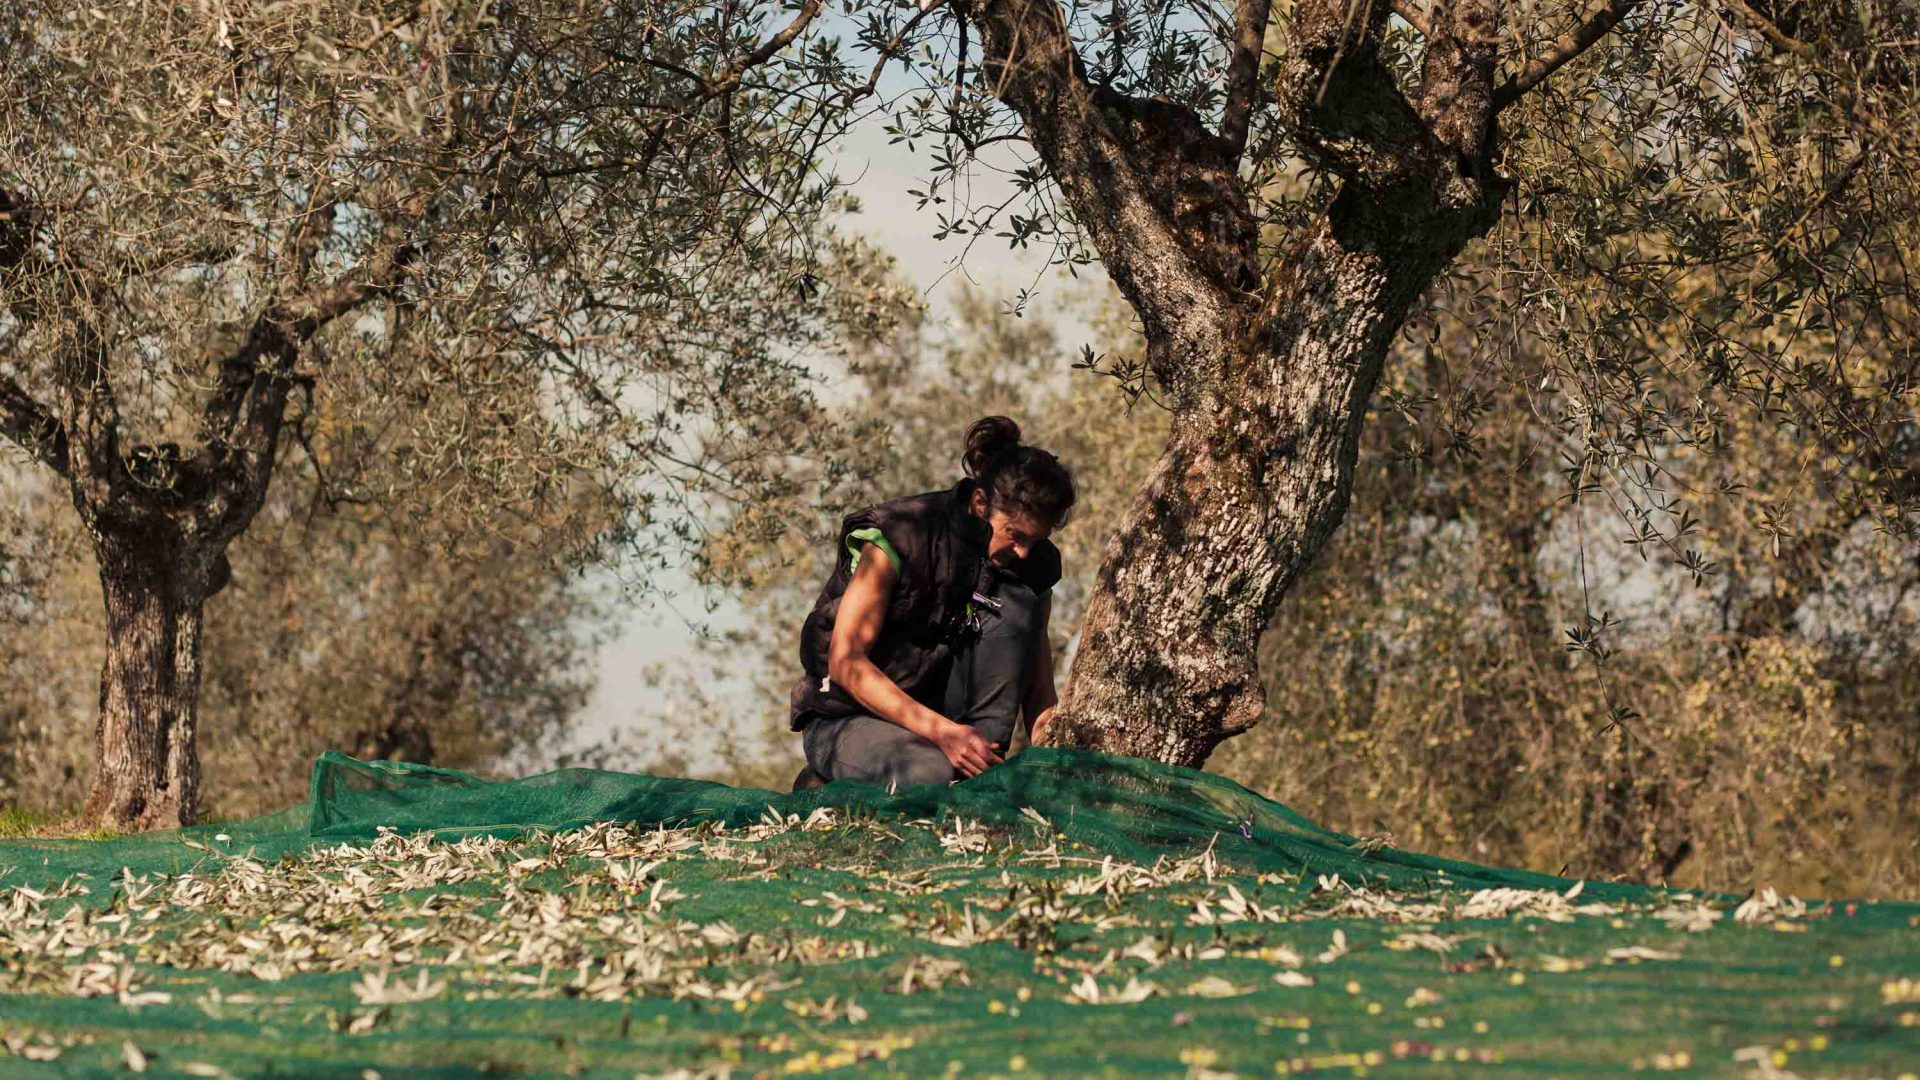 A man is bent down fixing a green net used for harvesting olives.